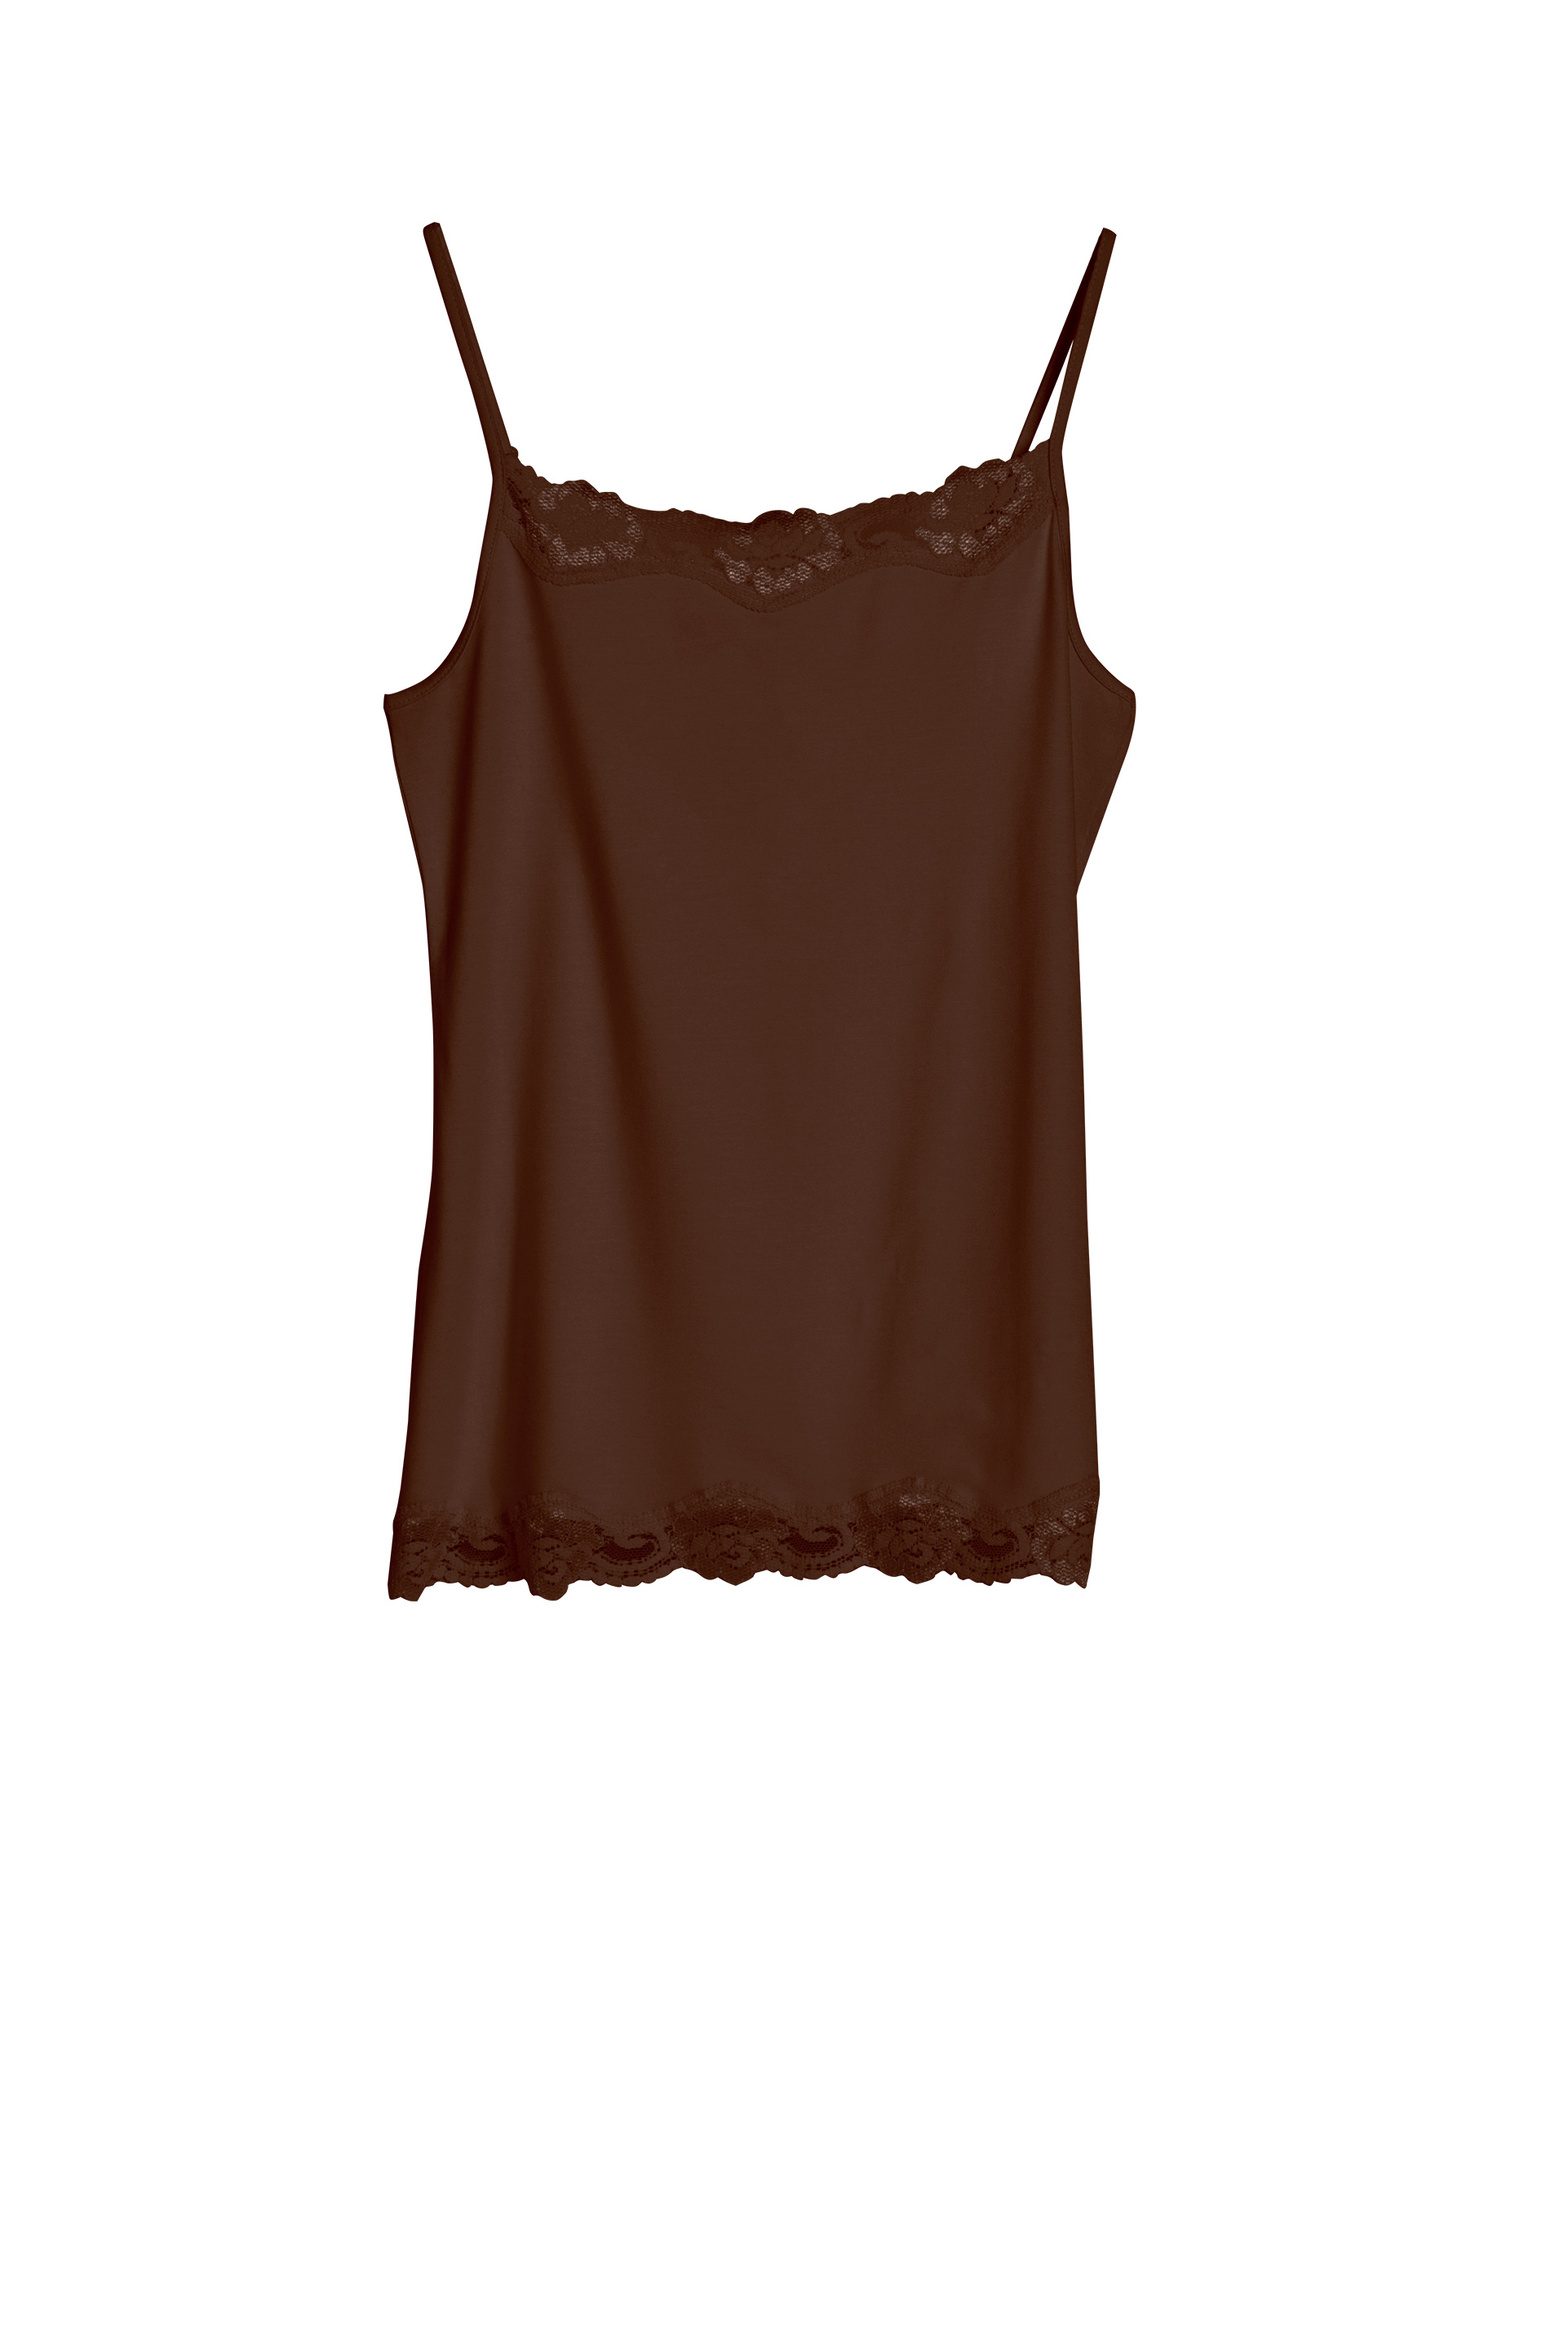 7200_lace_camisole_rich_chocolate.jpg